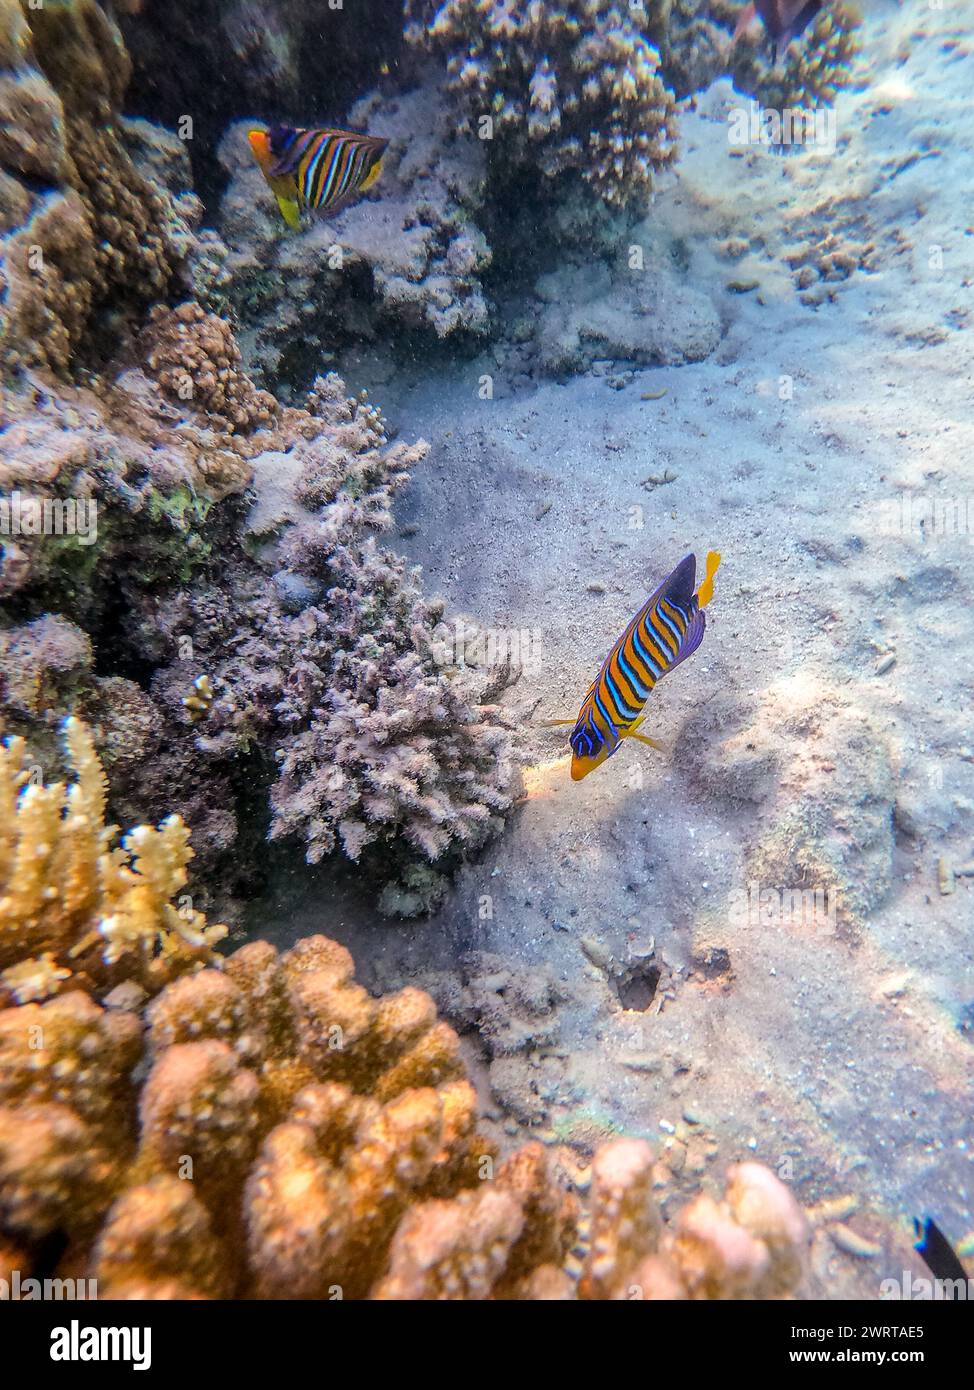 Tropical Angel fish or Royal angelfish known as Pygoplites diacanthus underwater at the coral reef. Underwater life of reef with corals and tropical f Stock Photo